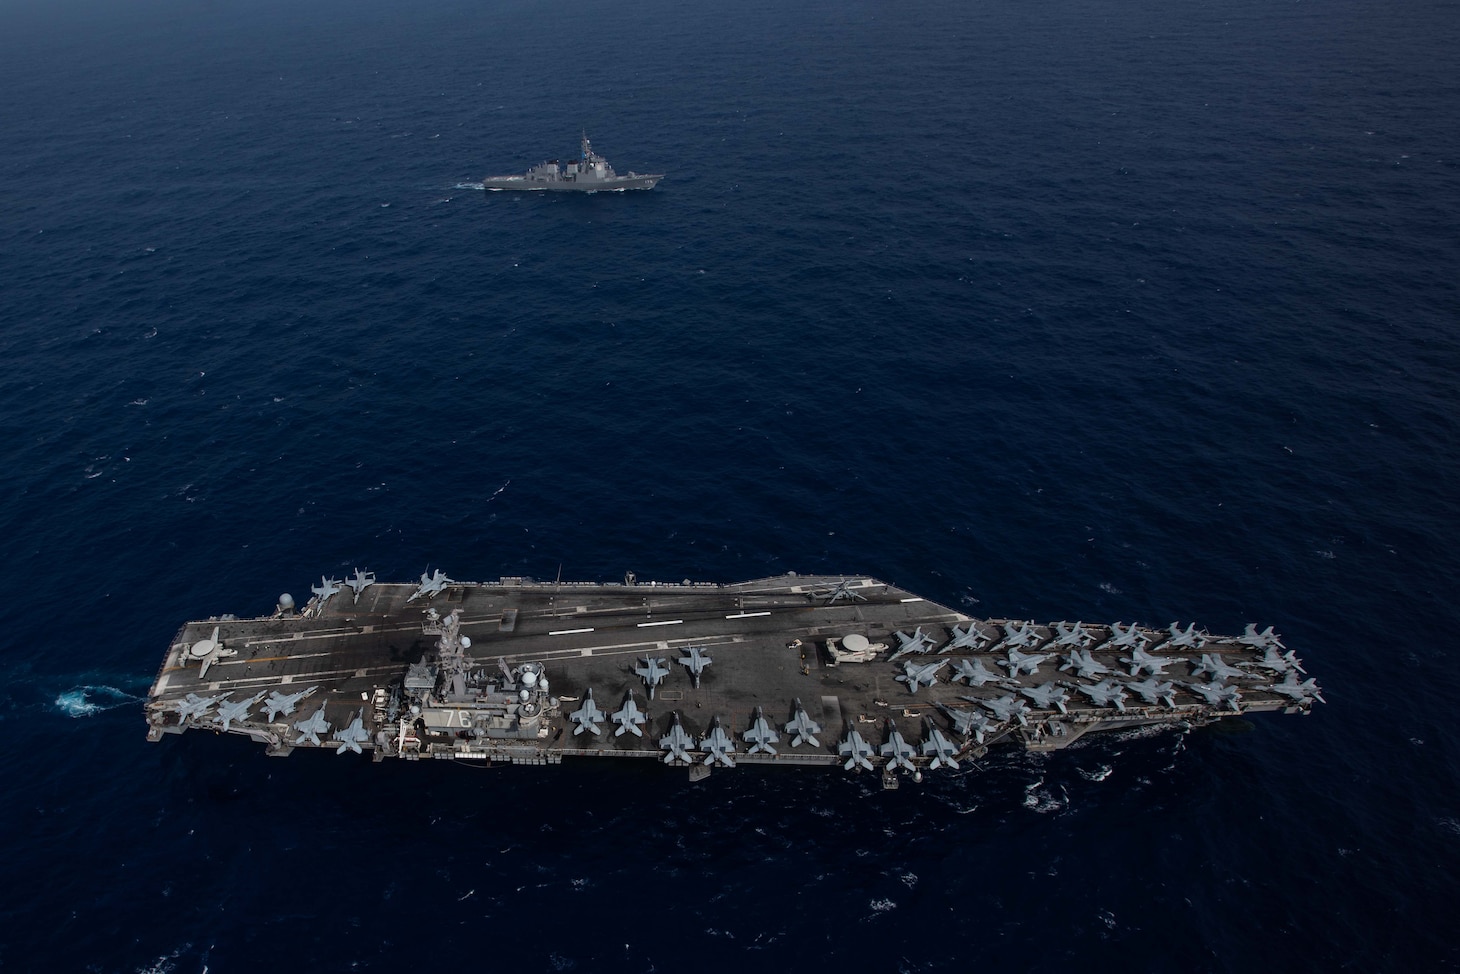 PHILIPPINE SEA (August 15, 2019) The Navy’s forward-deployed aircraft carrier USS Ronald Reagan (CVN 76) sails alongside the Japan Maritime Self-Defense Force guided-missile destroyer JS Myoko (DDG-175) while underway. The Navy and JMSDF regularly operate, train and exercise together to improve interoperability and strengthen joint capabilities. Ronald Reagan, the flagship of Carrier Strike Group 5, provides a combat-ready force that protects and defends the collective maritime interests of its allies and partners in the Indo-Pacific region.